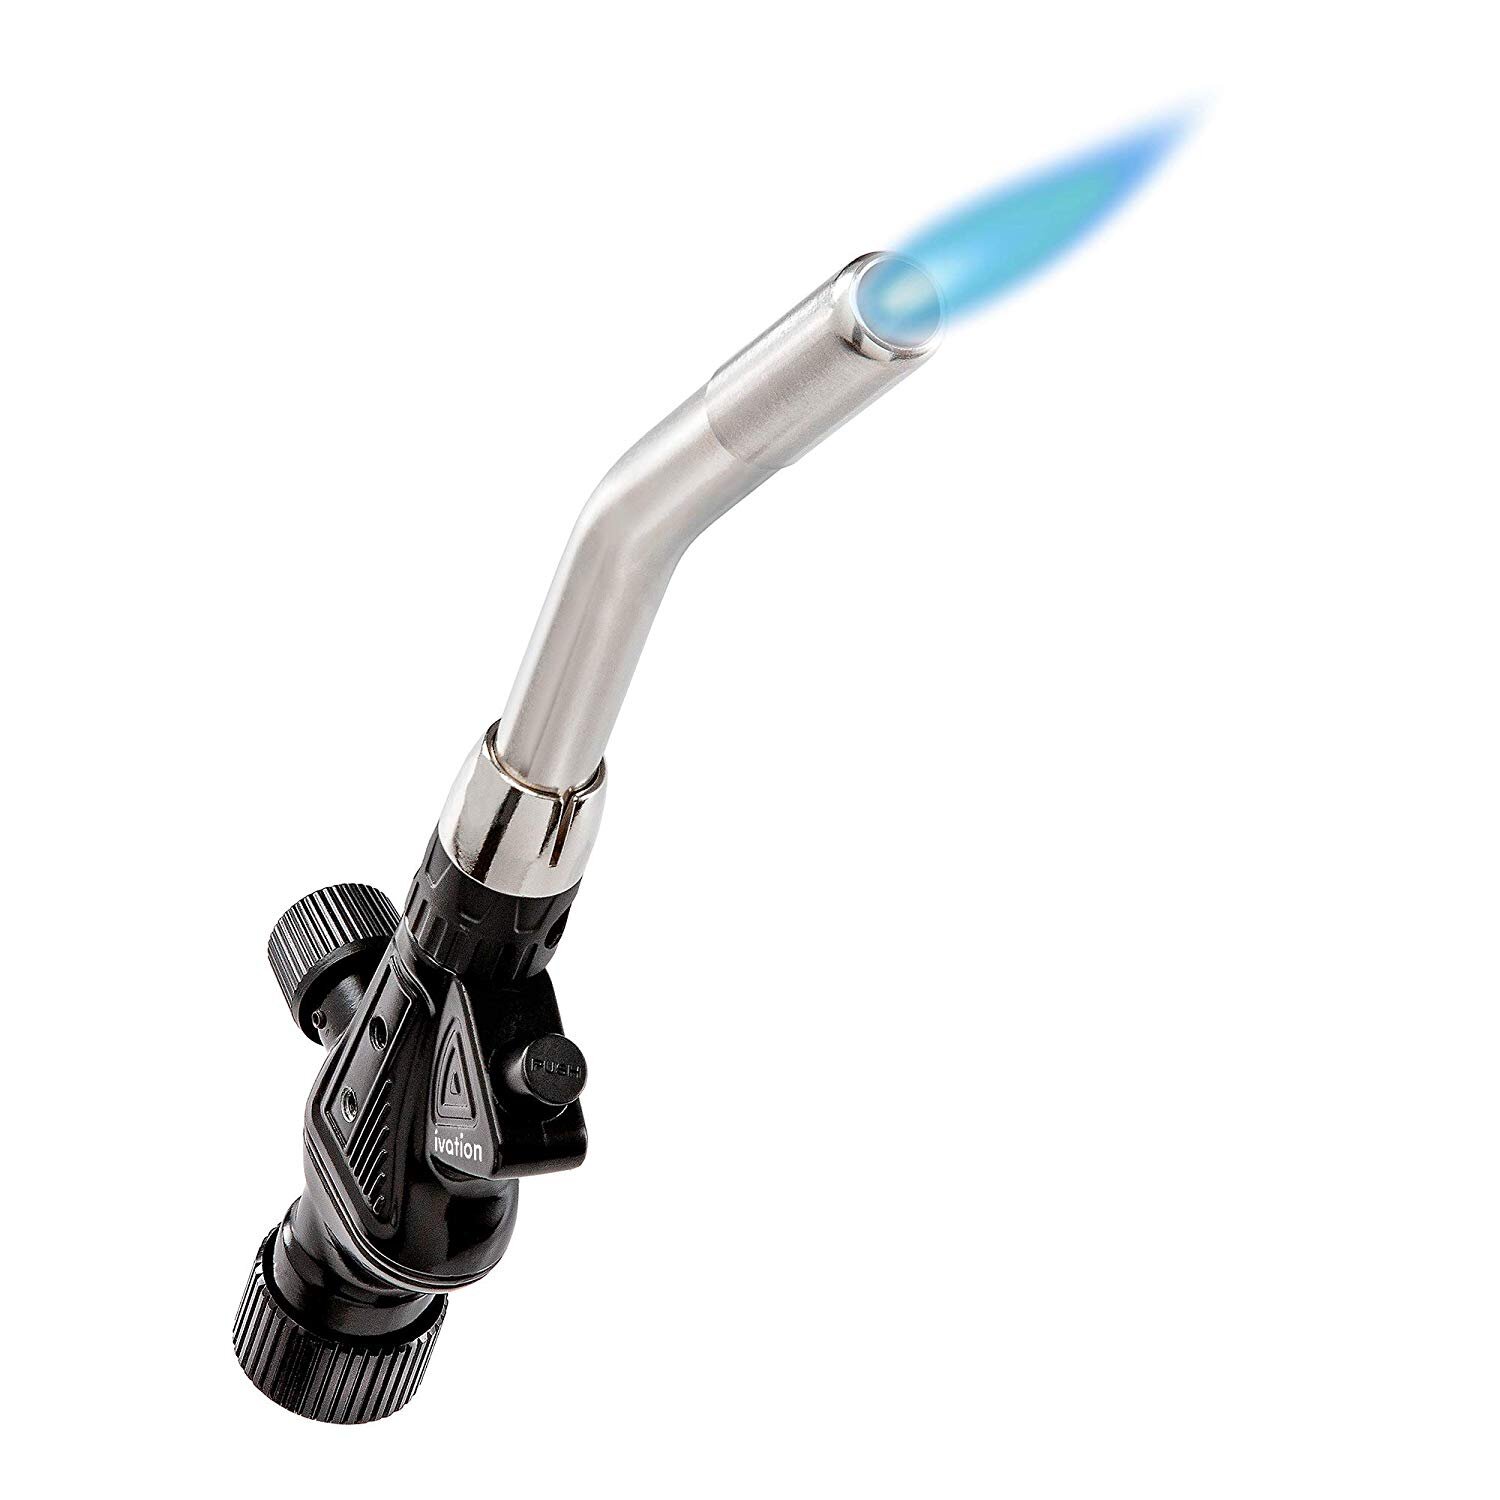 Trigger Start Propane Torch Fuel by Propane/MAP Pro/MAPP MAX 3200°F Torch Head High-Temperature Flame Easy Adjustable Flame Control for Soldering Brazing Light Welding 